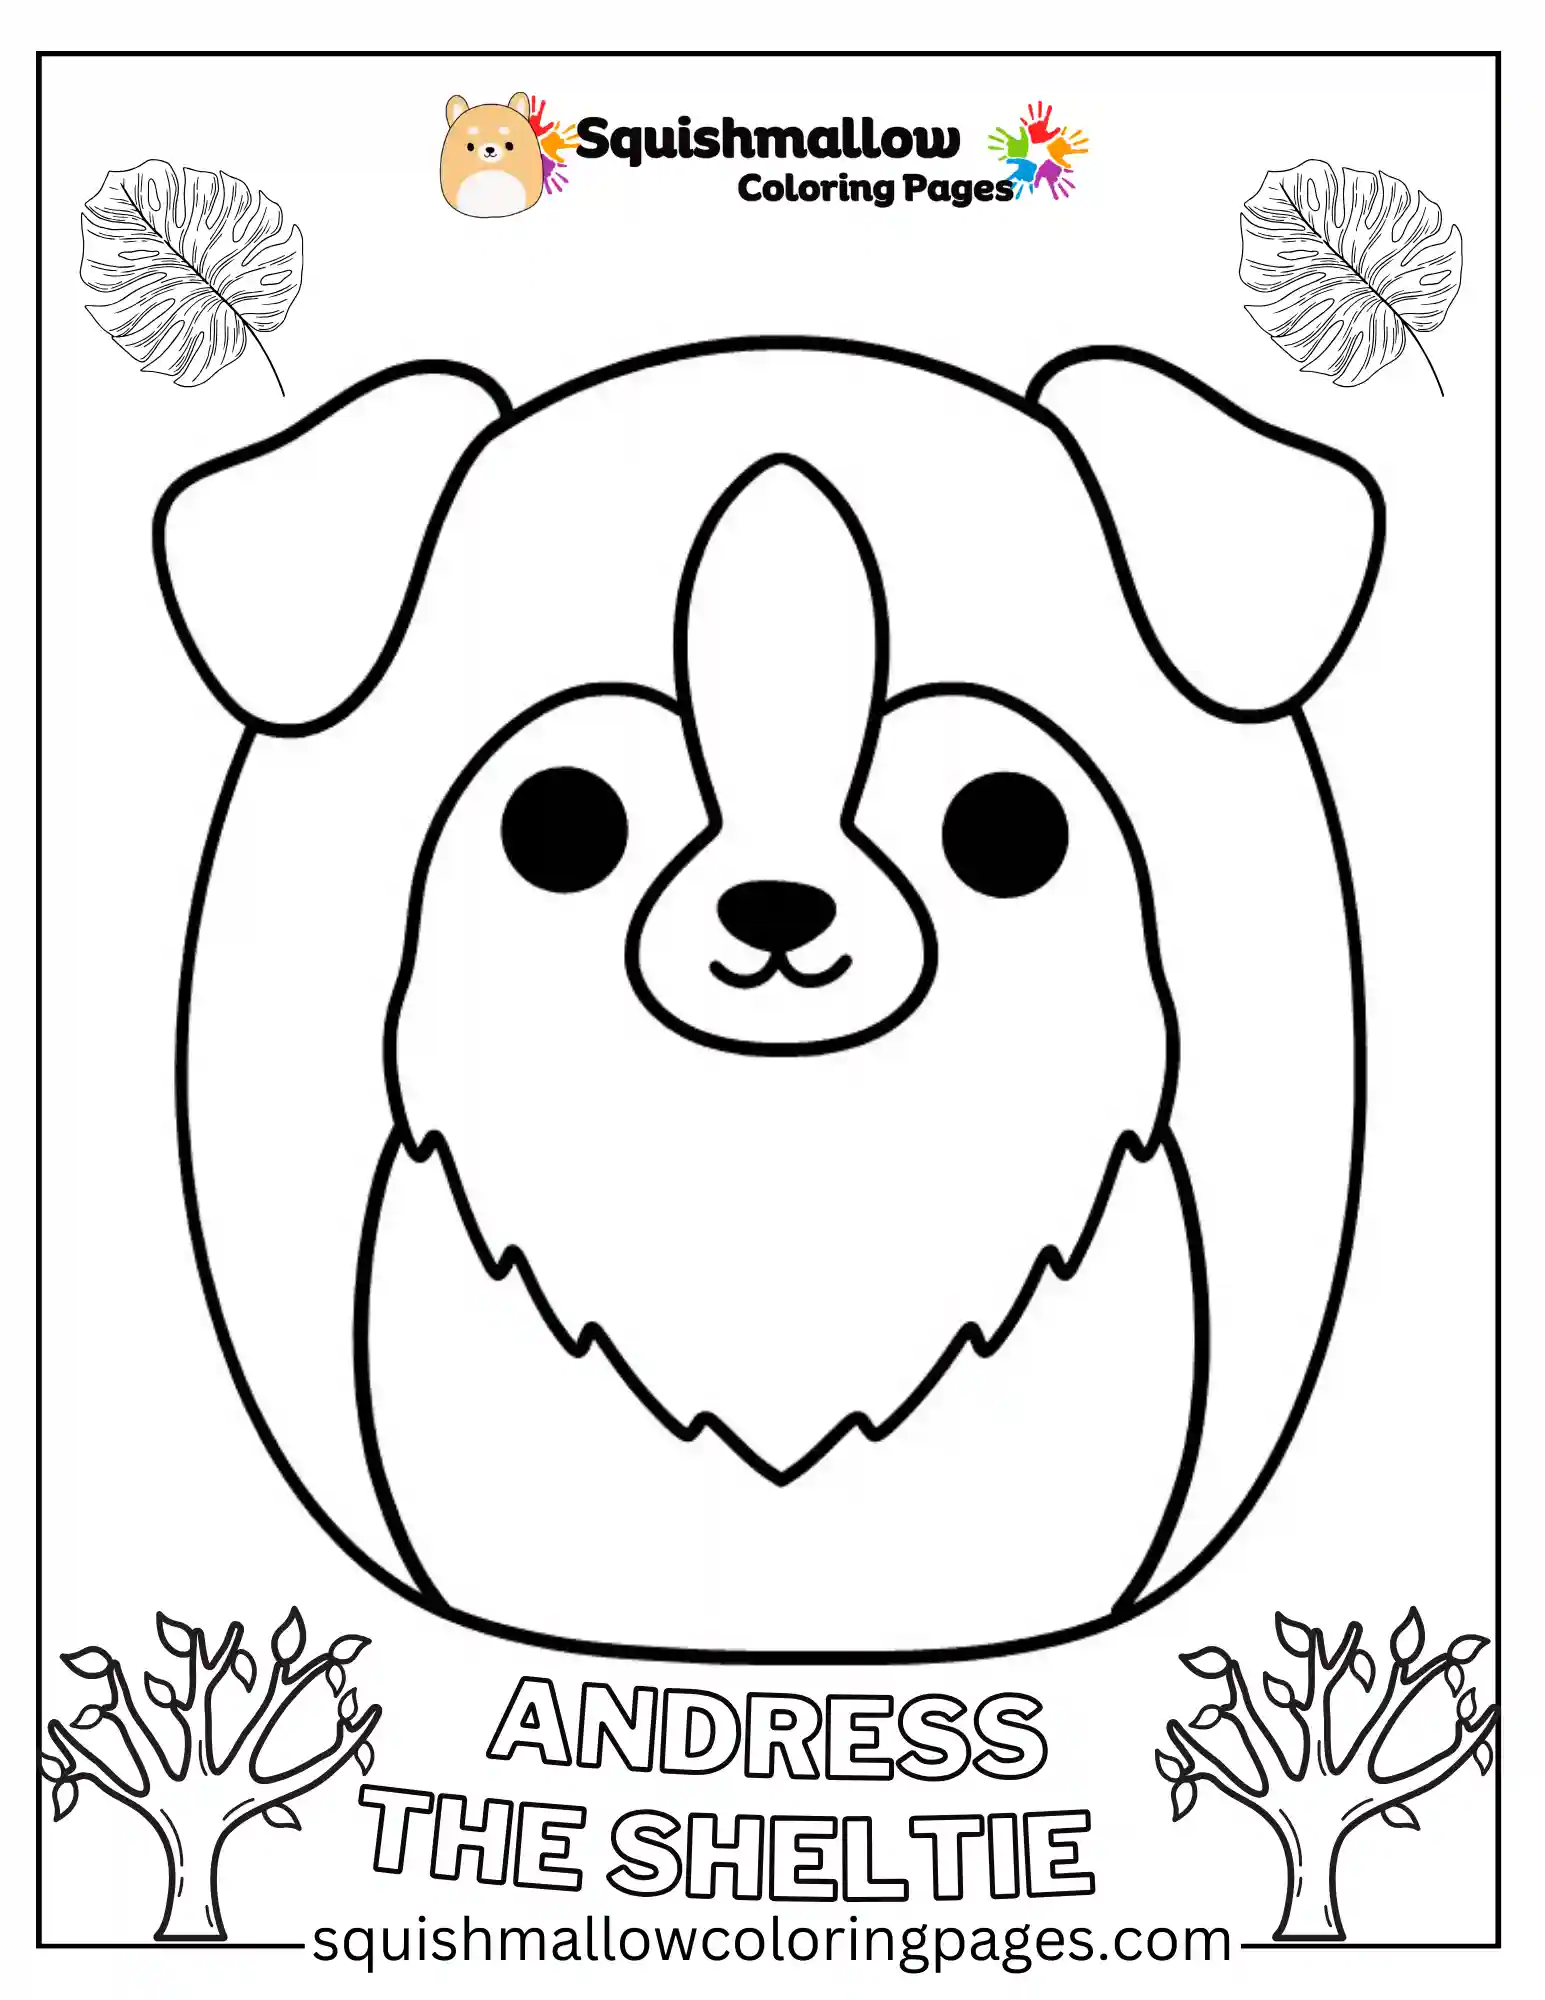 Andress The Sheltie Squishmallows Coloring Page